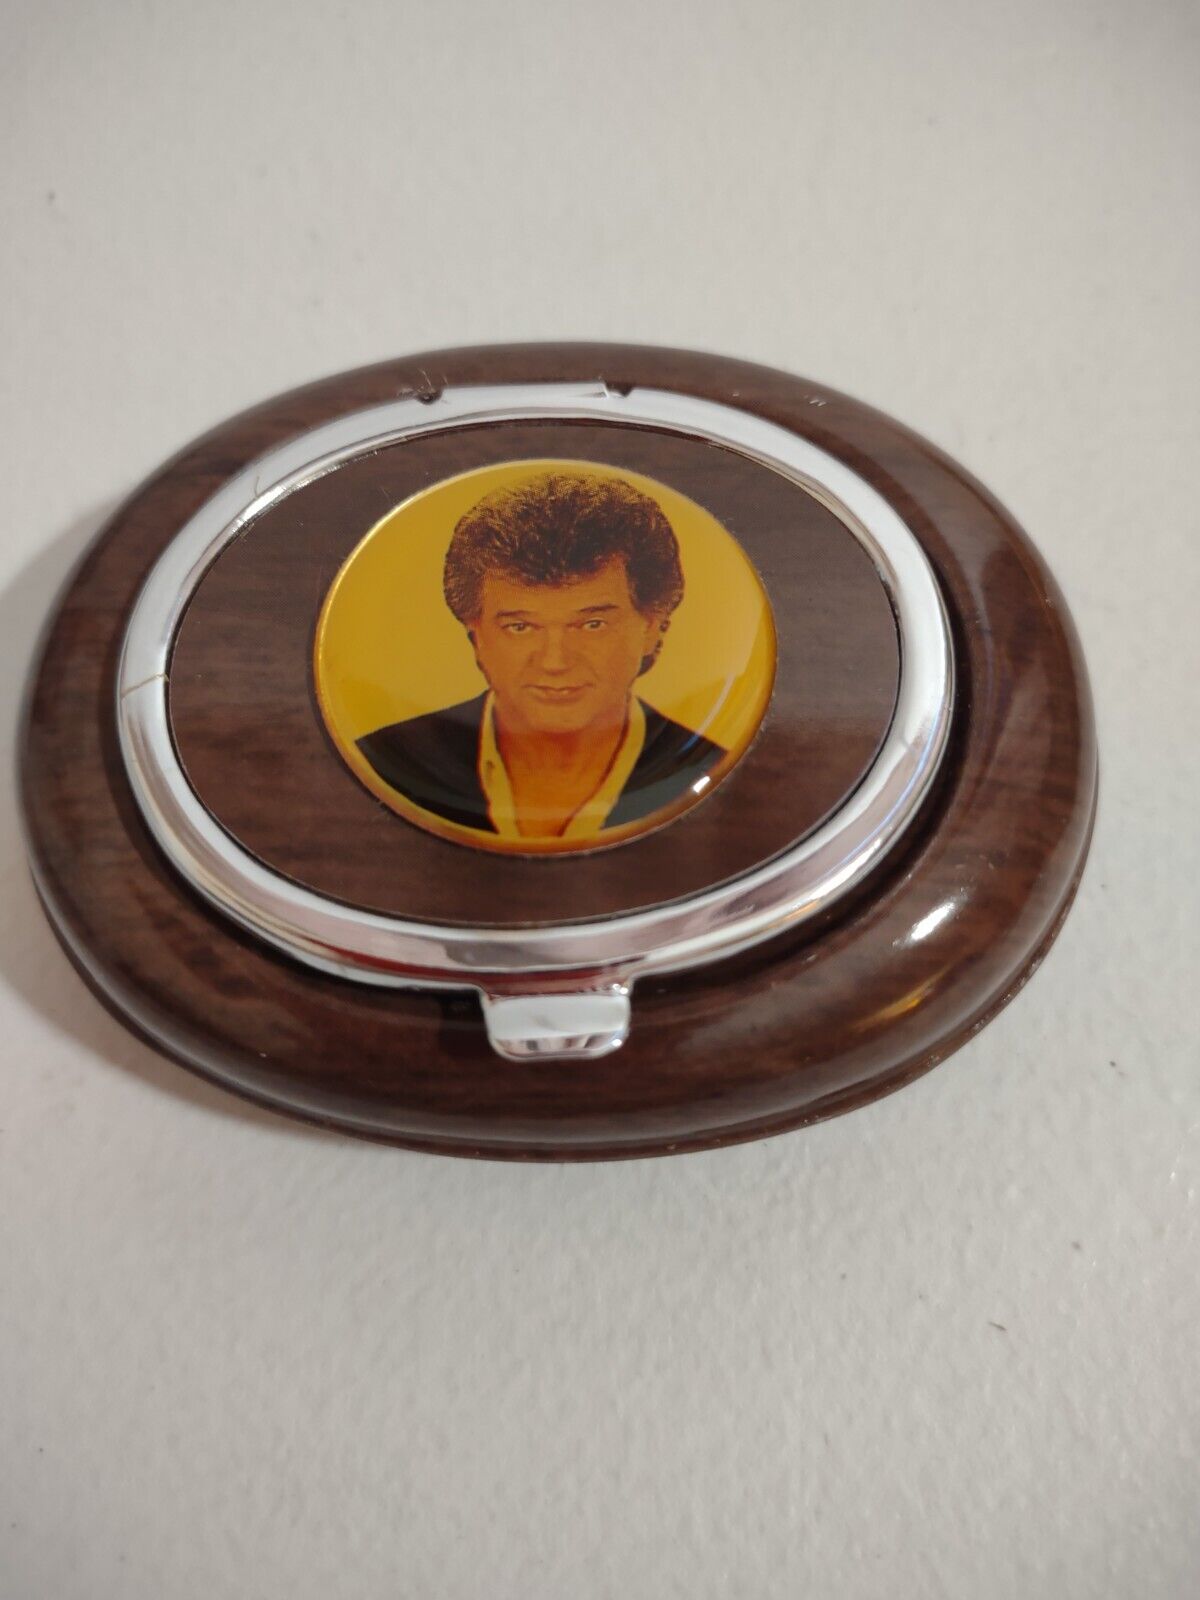 Vintage Conway Twitty Ashtray Looks Like It Has Never Been Used